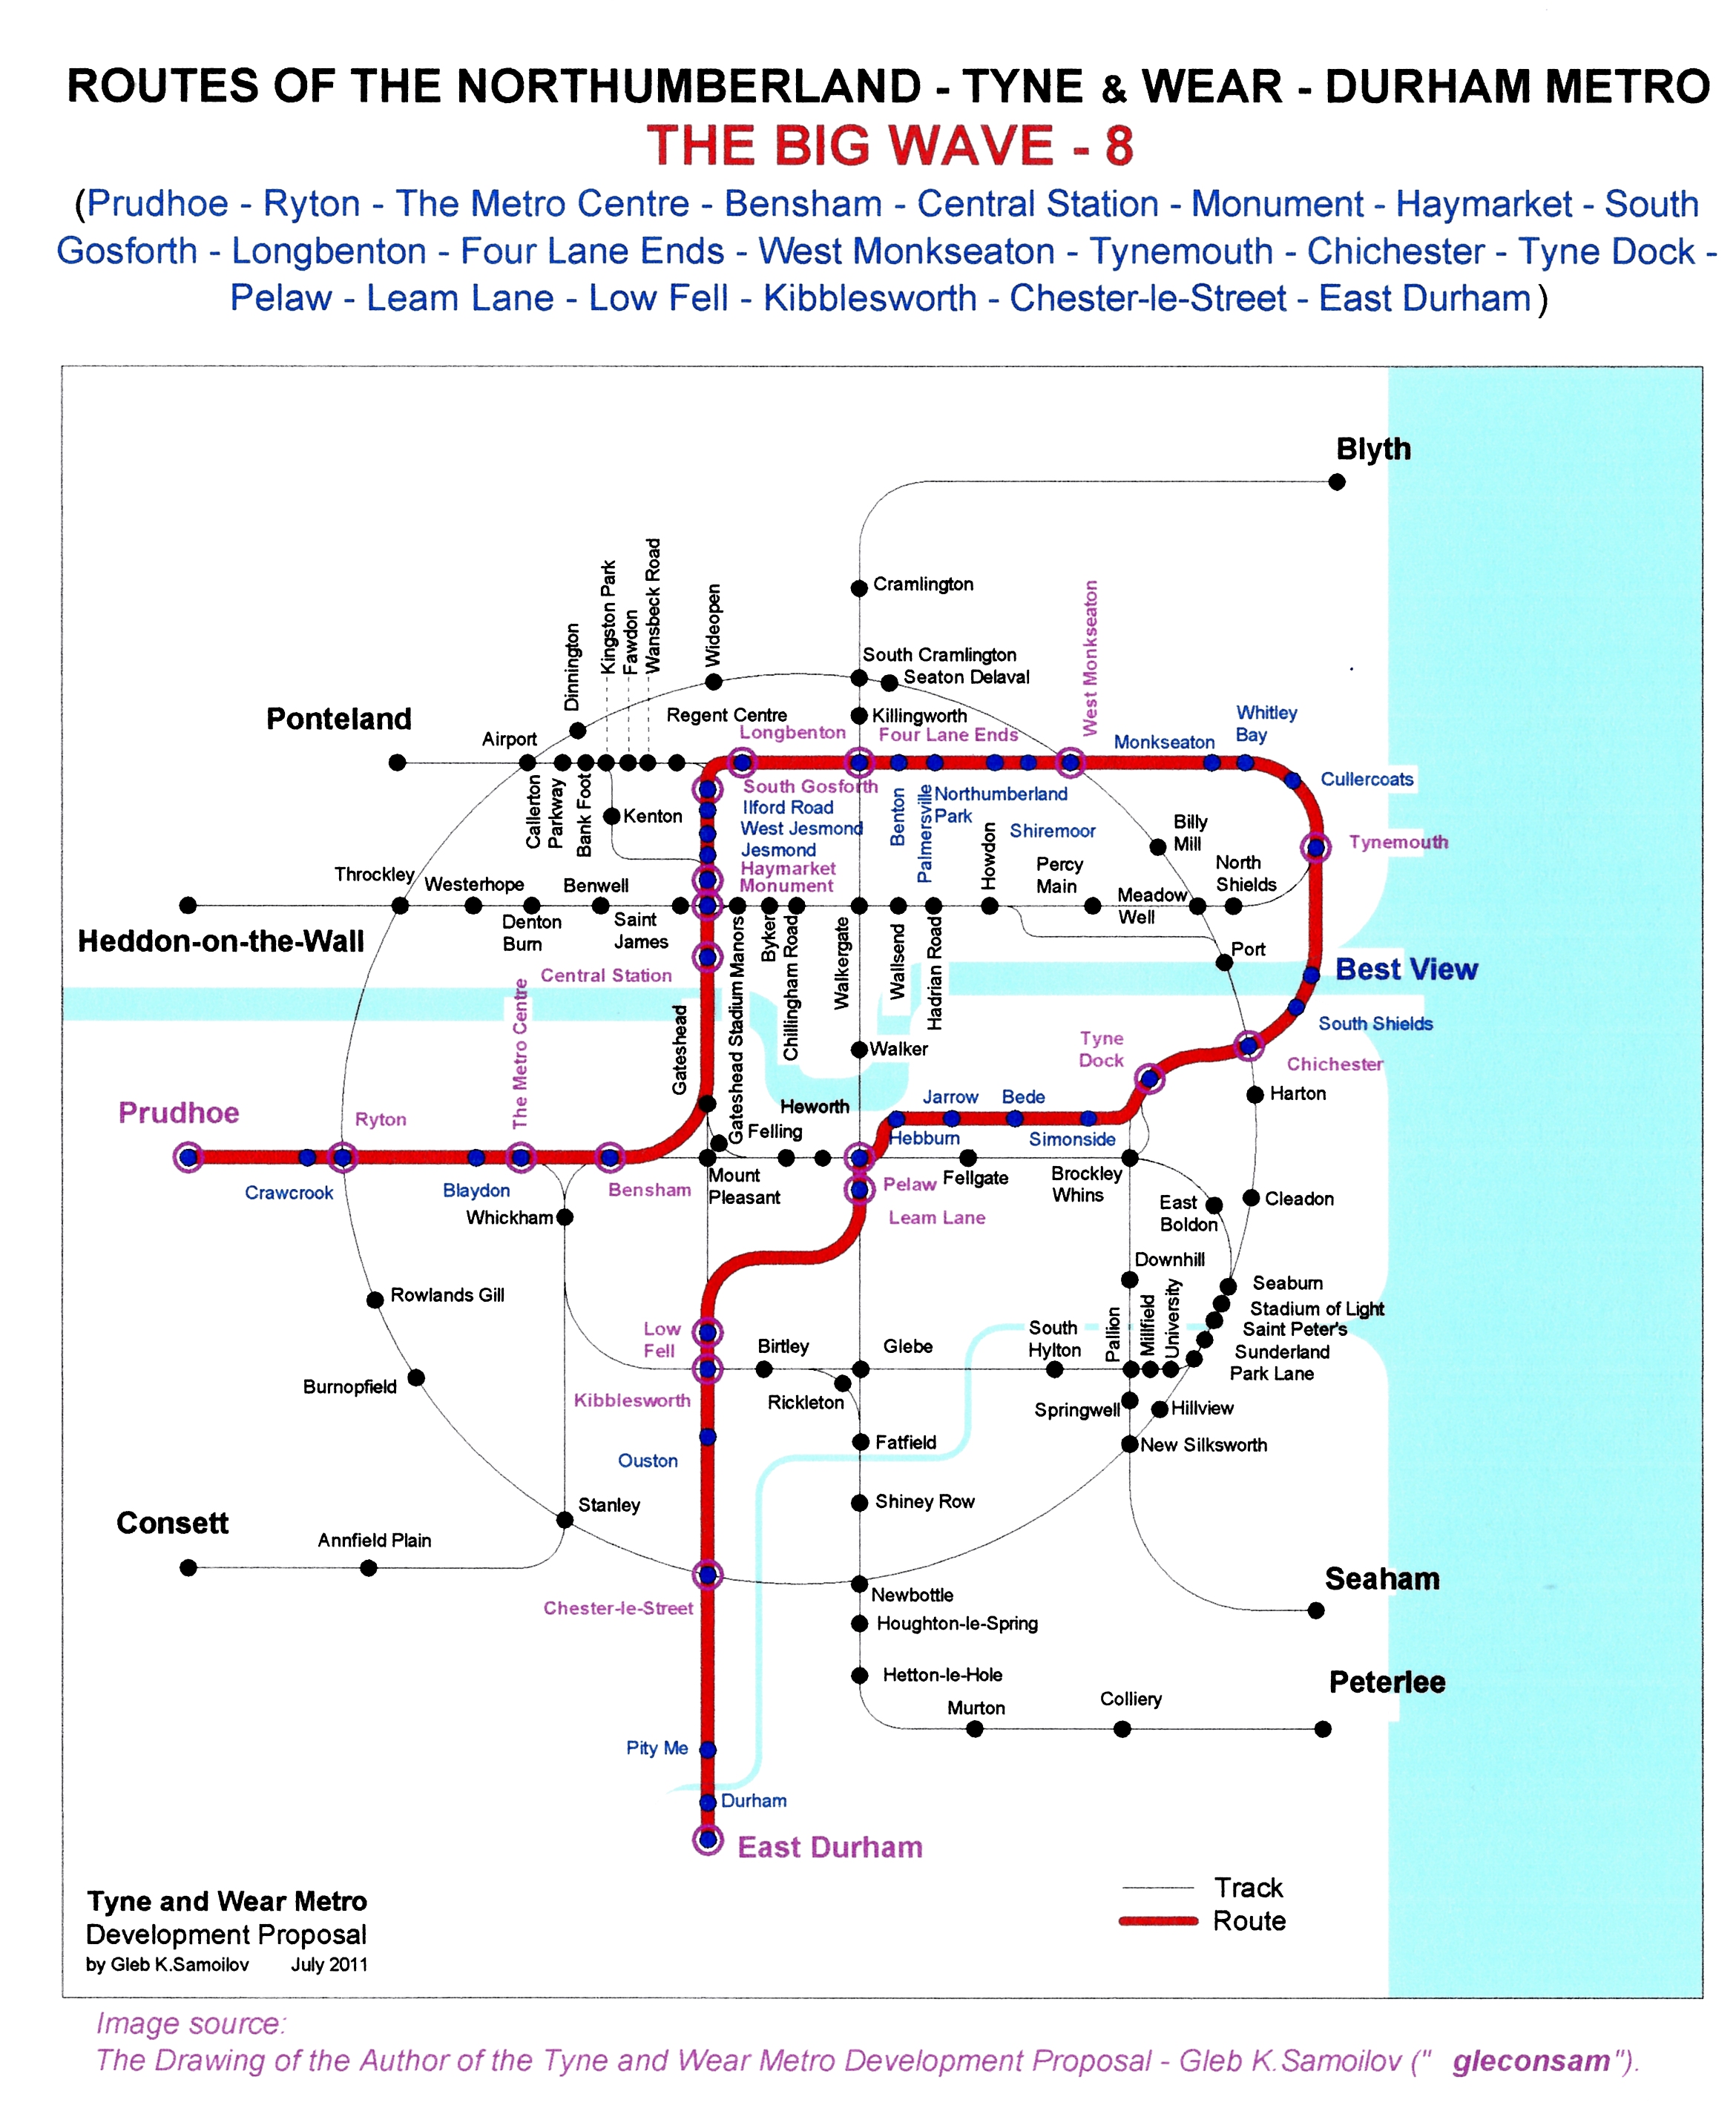 The Tyne and Wear Metro. Developed network routes. The BIG WAVE-8